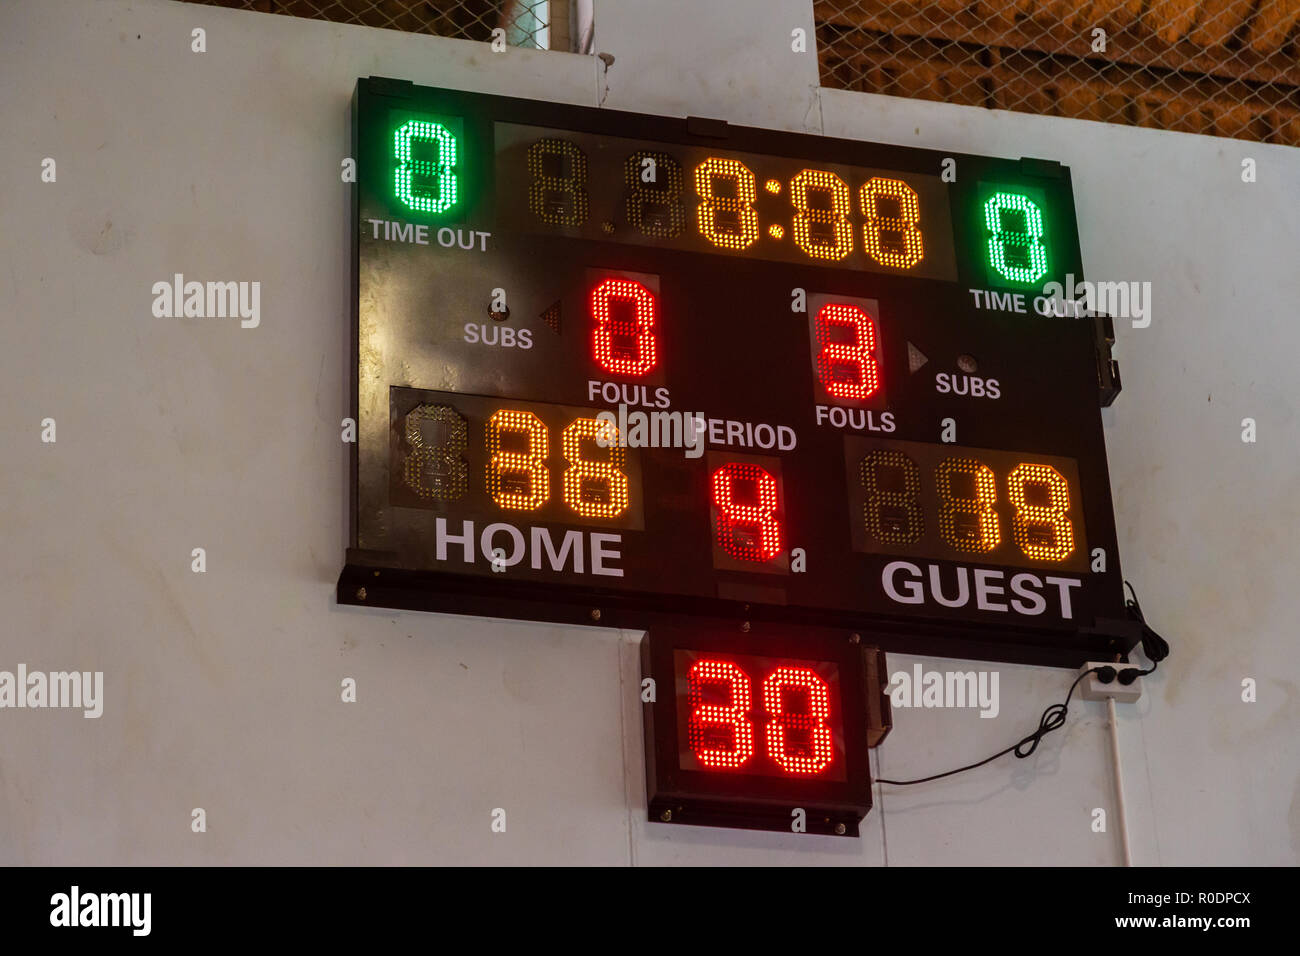 Sport scoreboard showing game result at a local sport arena Stock Photo